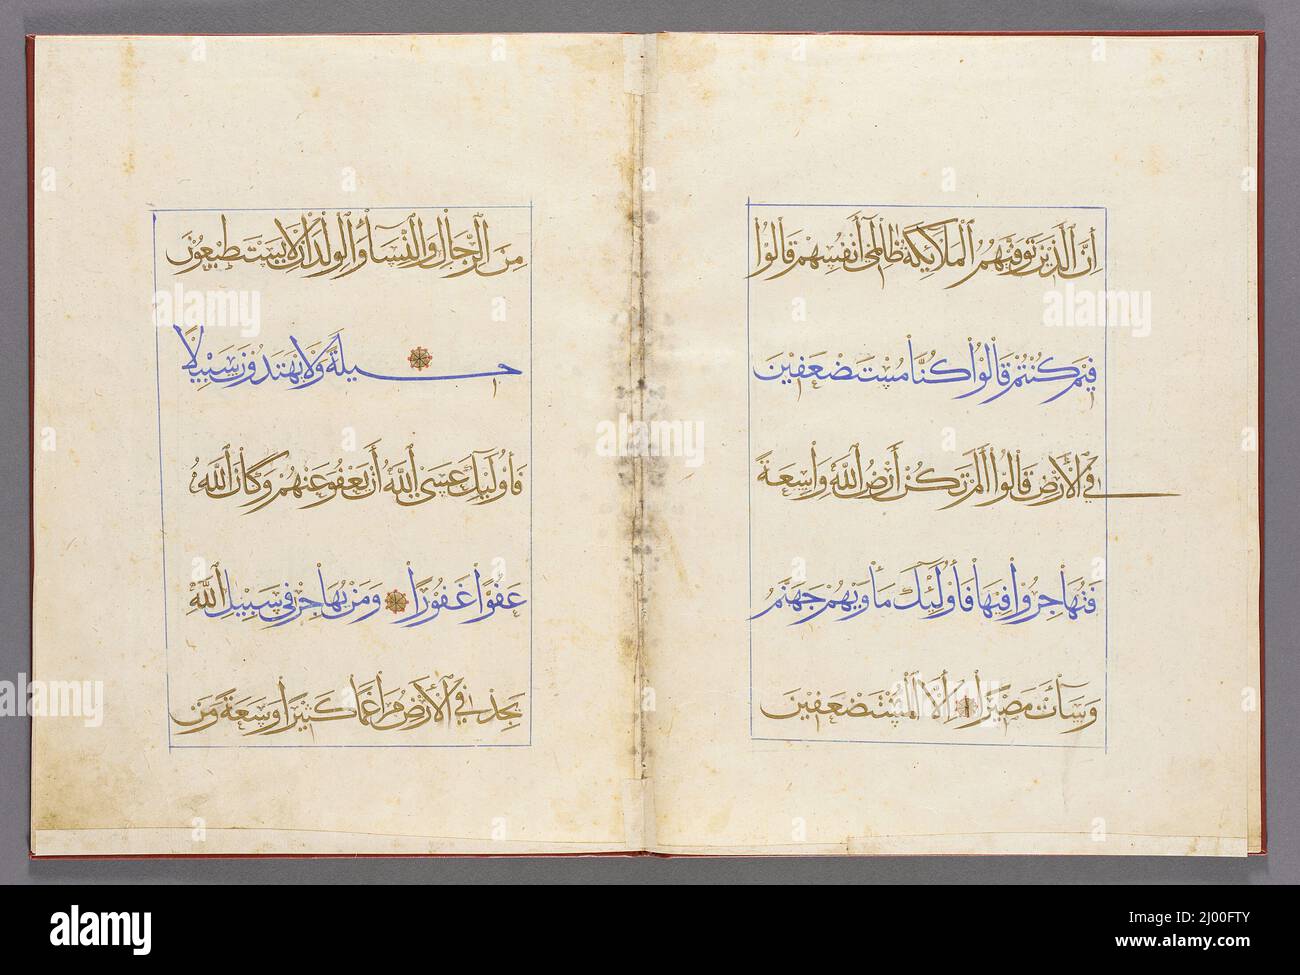 Section from a Manuscript of the Qur'an. Turkey, 15th century. Manuscripts; codices. Opaque watercolor and gold on paper Stock Photo